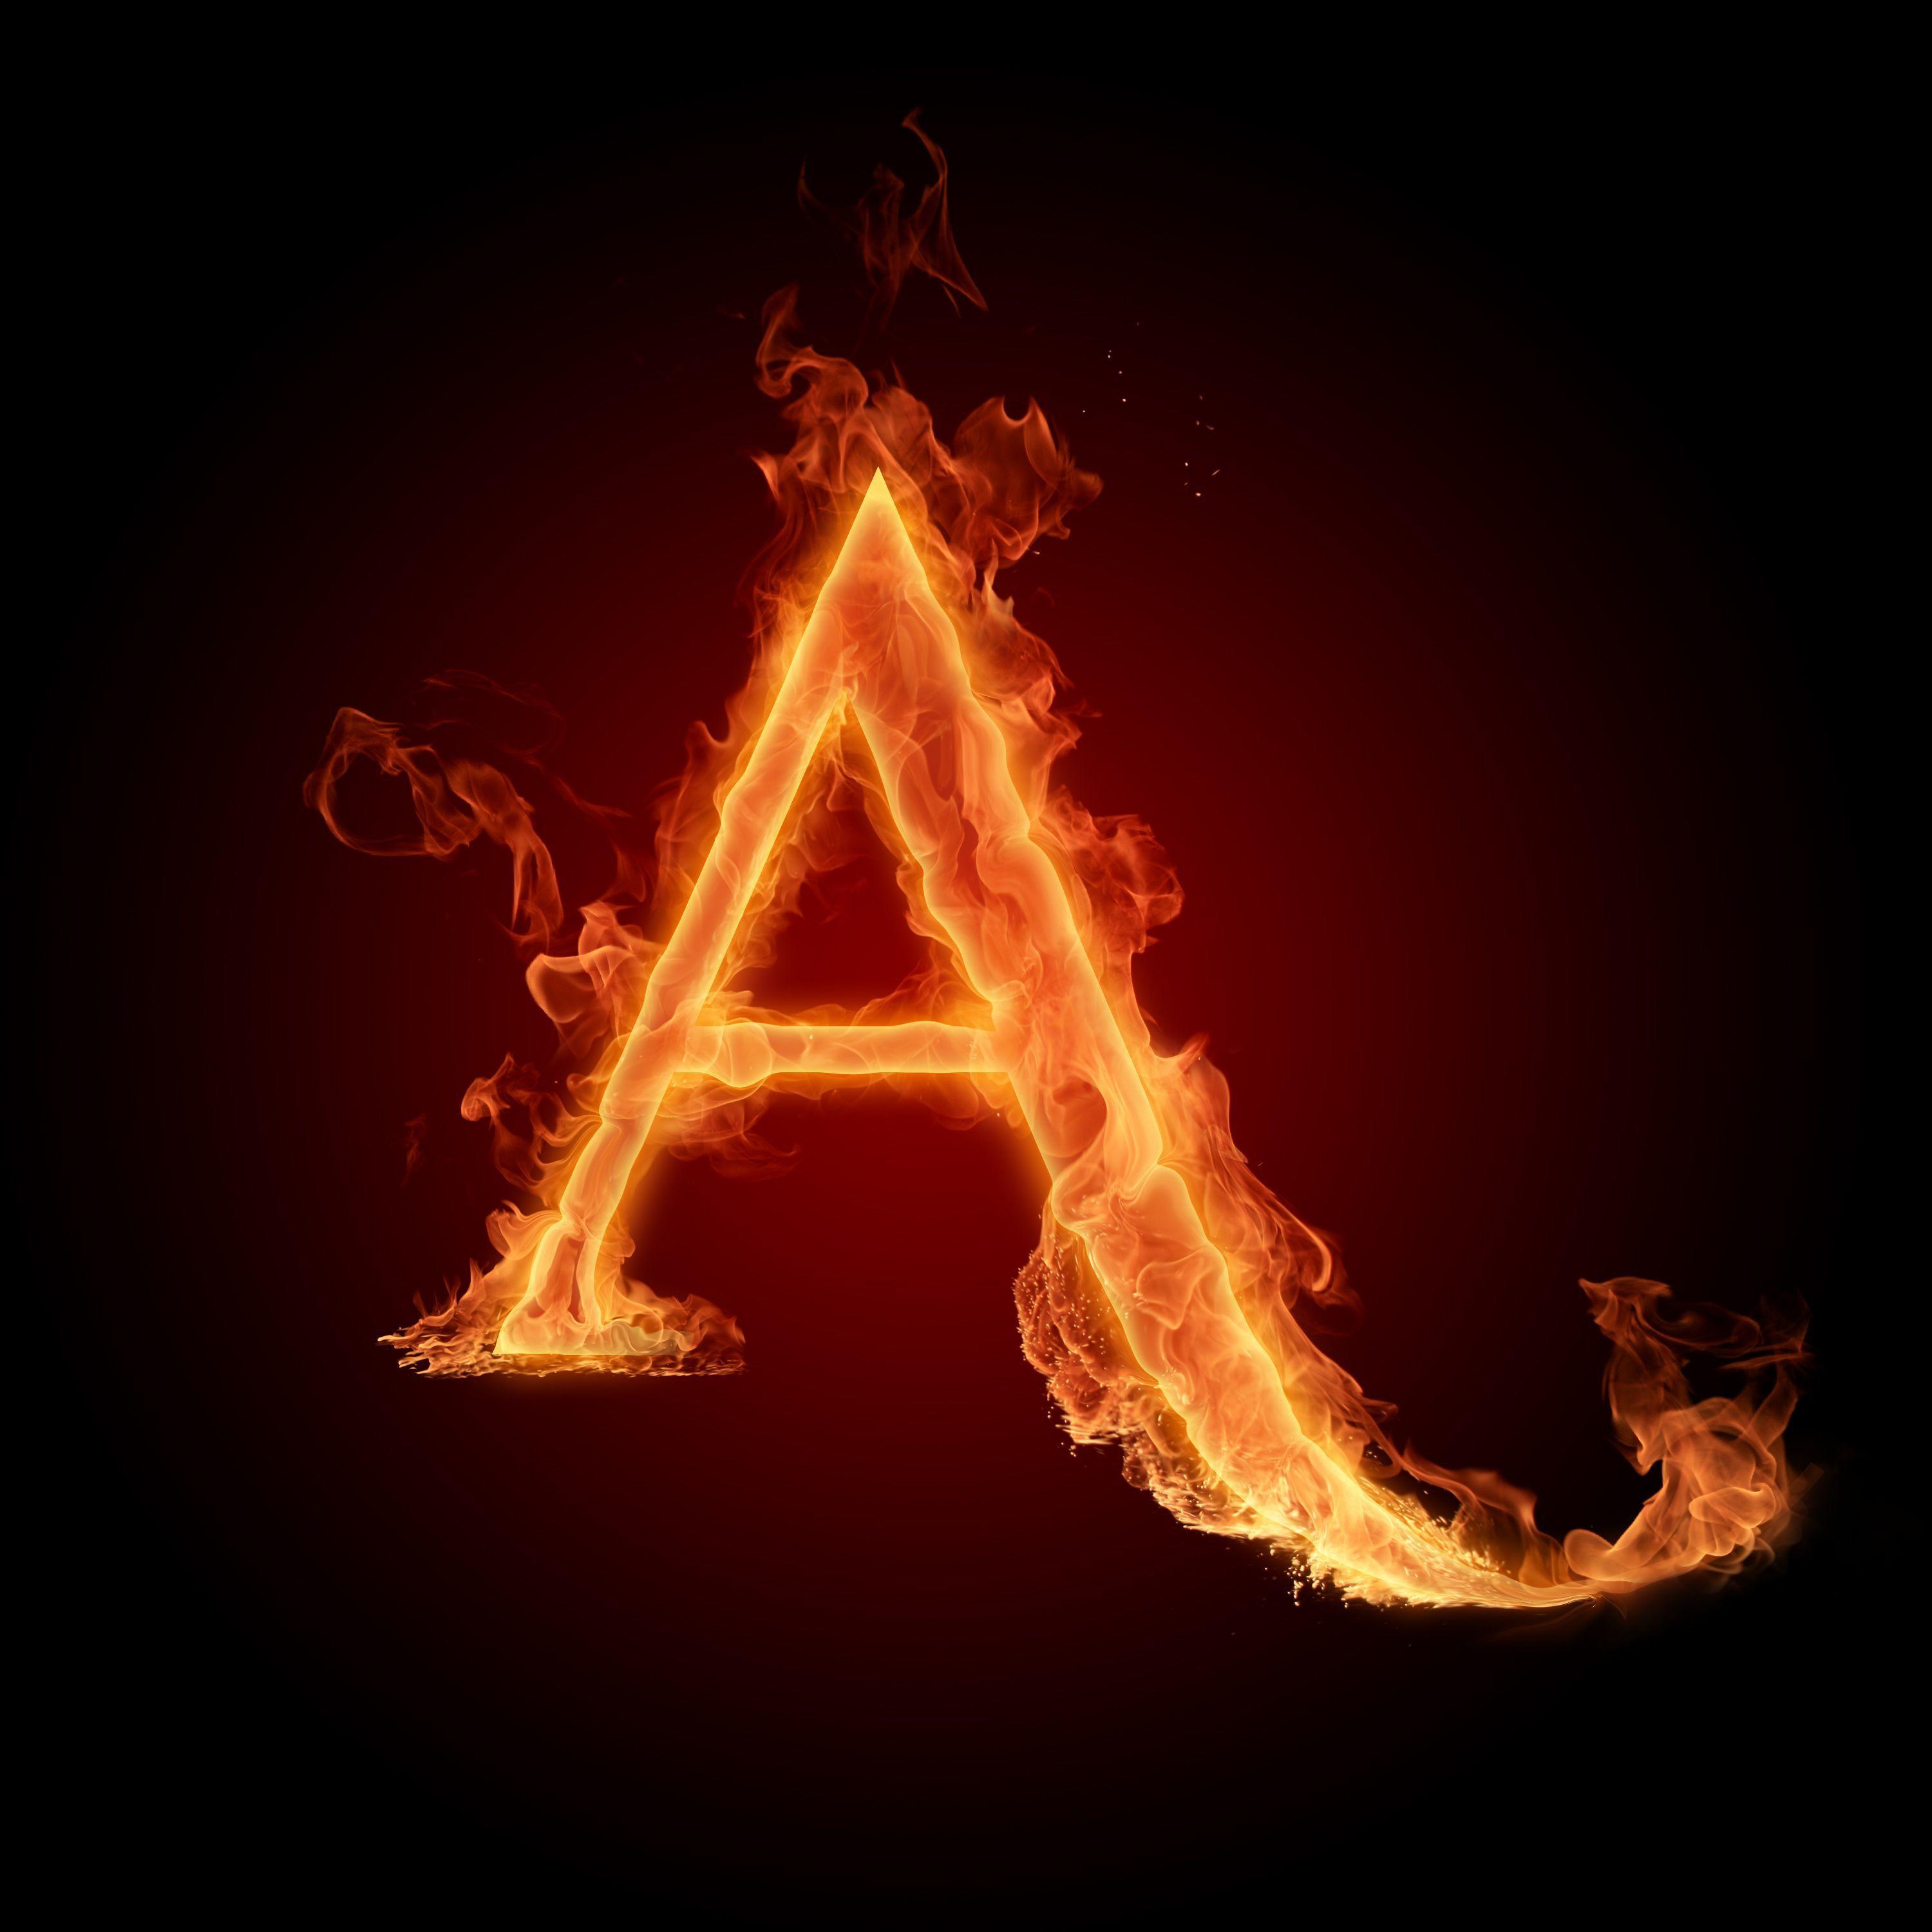 Free Letter A Wallpaper Downloads 200 Letter A Wallpapers for FREE   Wallpaperscom